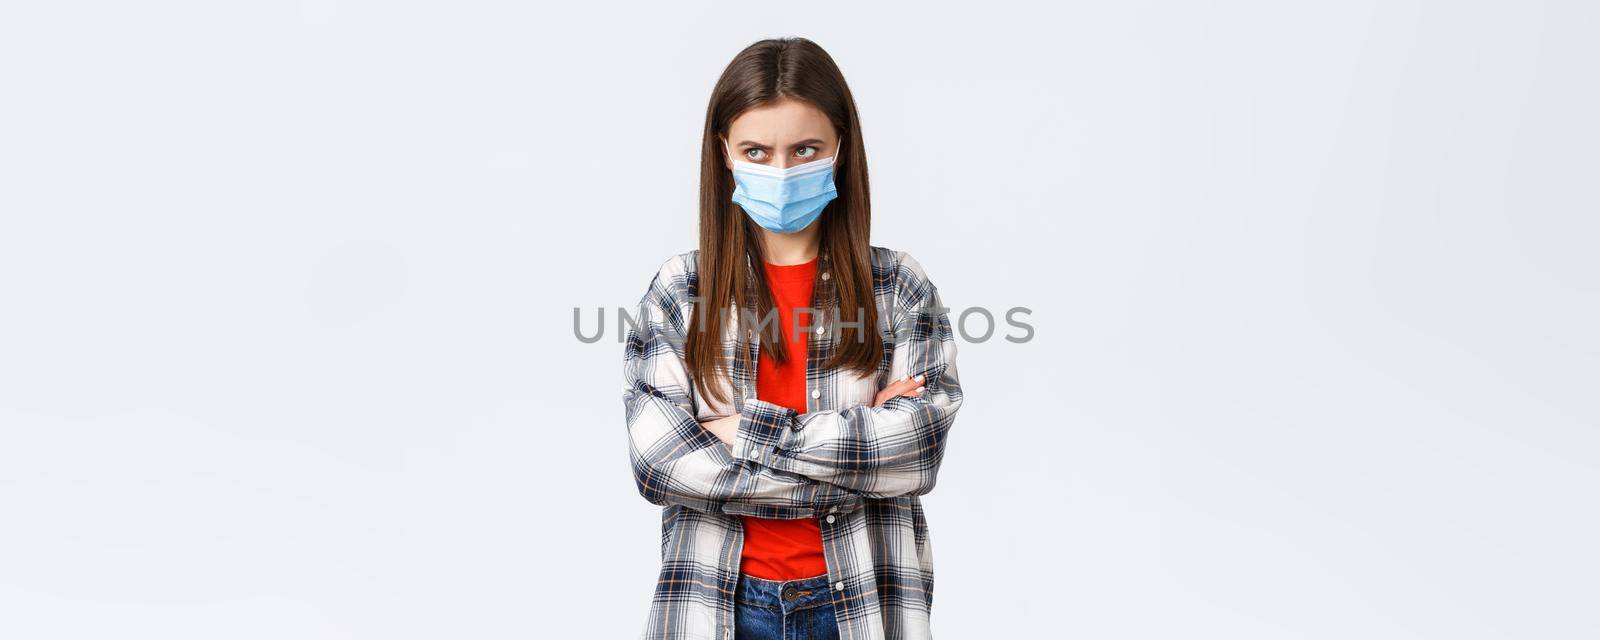 Coronavirus outbreak, leisure quarantine, social distancing and emotions concept. Mad young cute girl in medical mask, cross arms chest, look from under forehead upper left corner, jealous or angry.